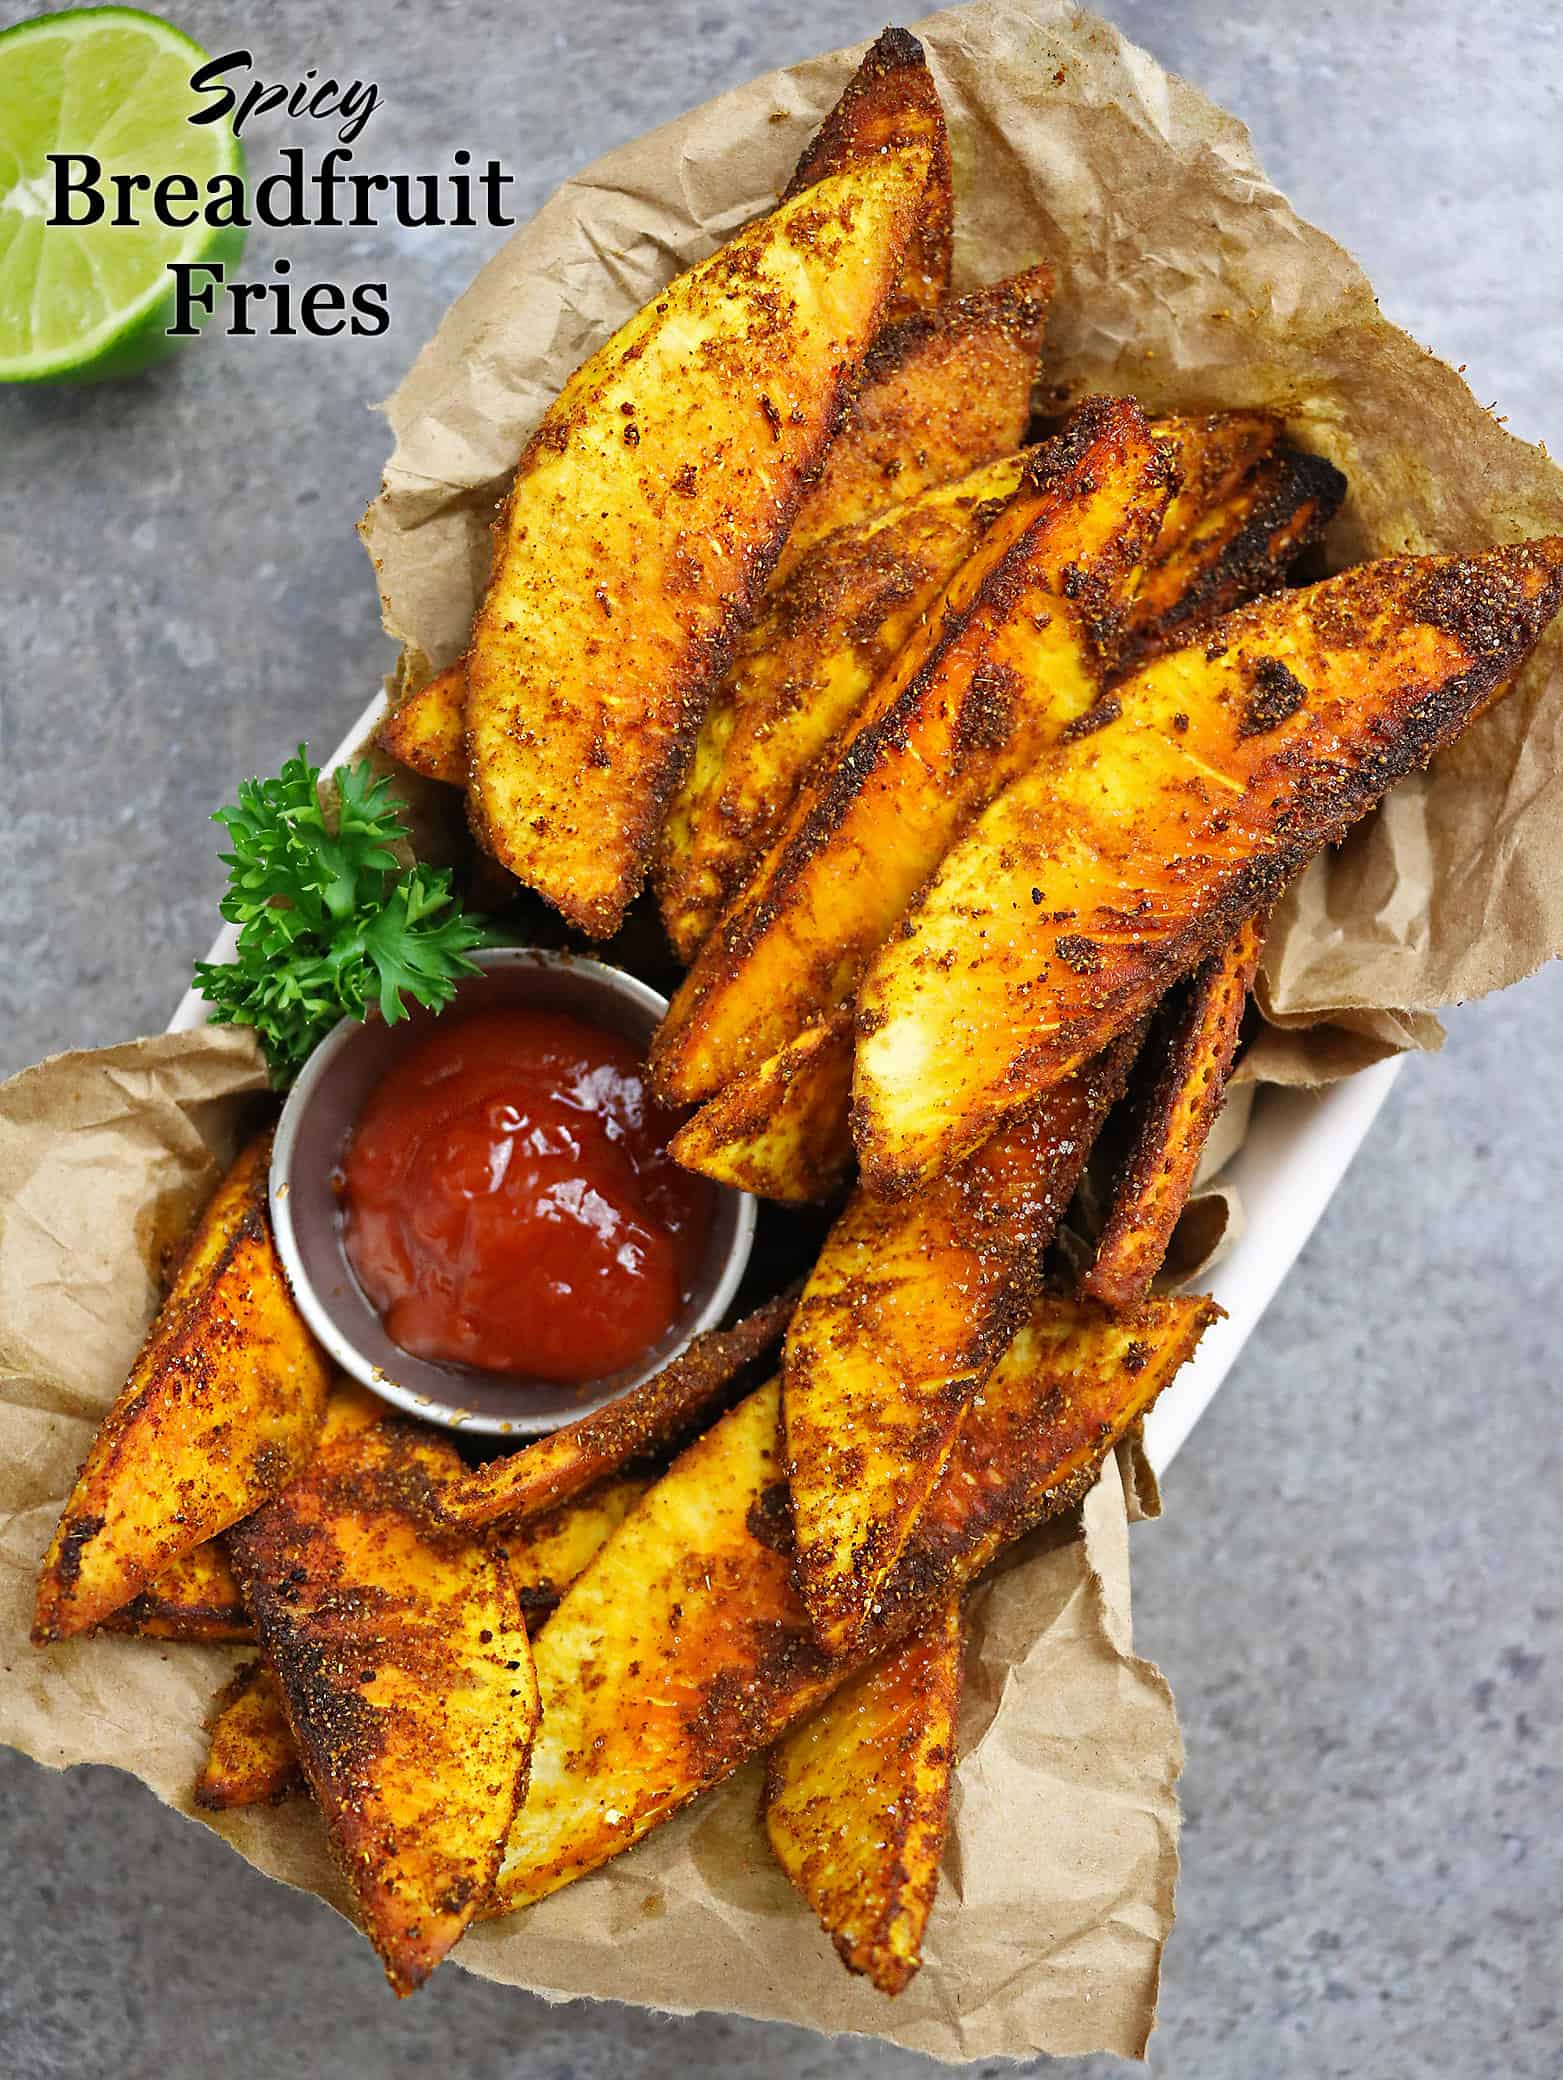 Breadfruit was a staple when I lived in Sri Lanka - and, boy-oh-boy, is it versatile! It can be boiled, baked, and roasted and enjoyed either in a sweet, savory or spicy dish - like these Spicy Breadfruit Fries. 